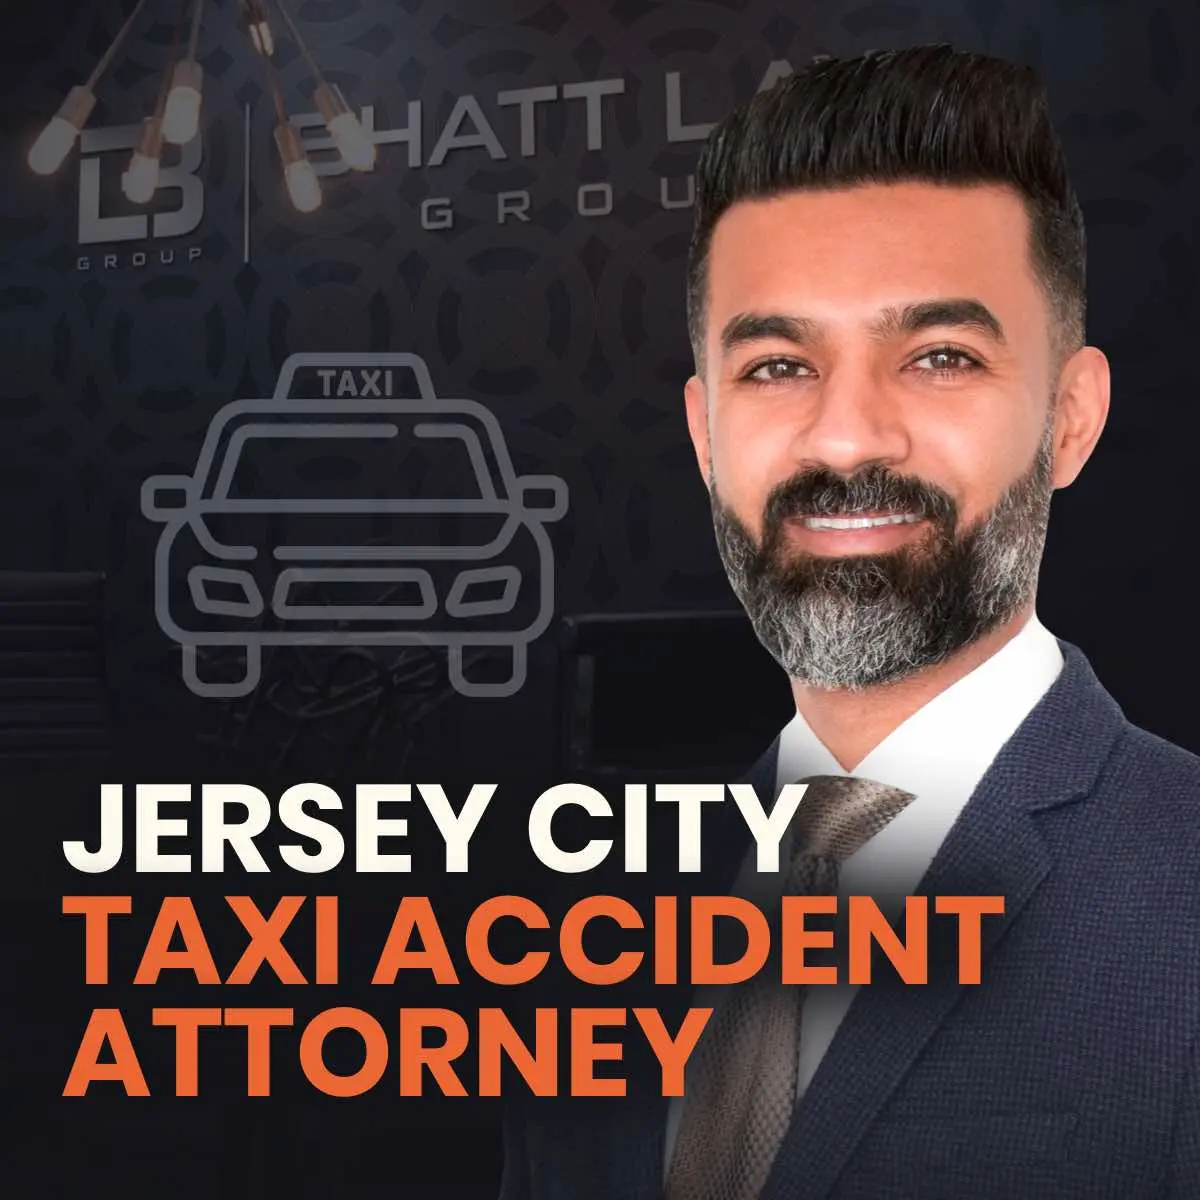 taxi accident lawyer - What happens if a taxi driver crashes